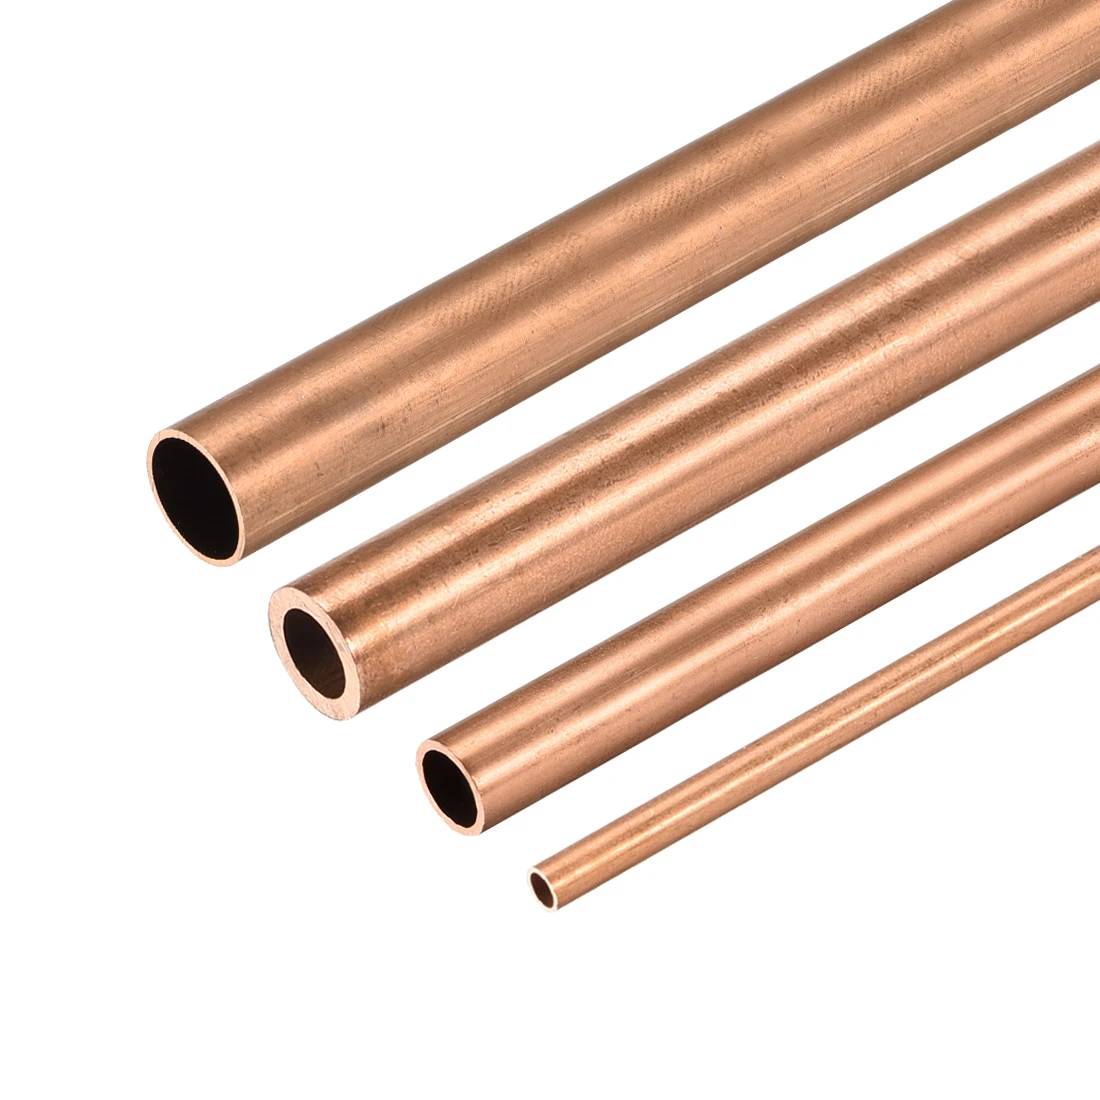 uxcell Copper Round Tube 6mm OD 1mm Wall Thickness 300mm Long Hollow Straight Pipe Tubing 2 Pcs 